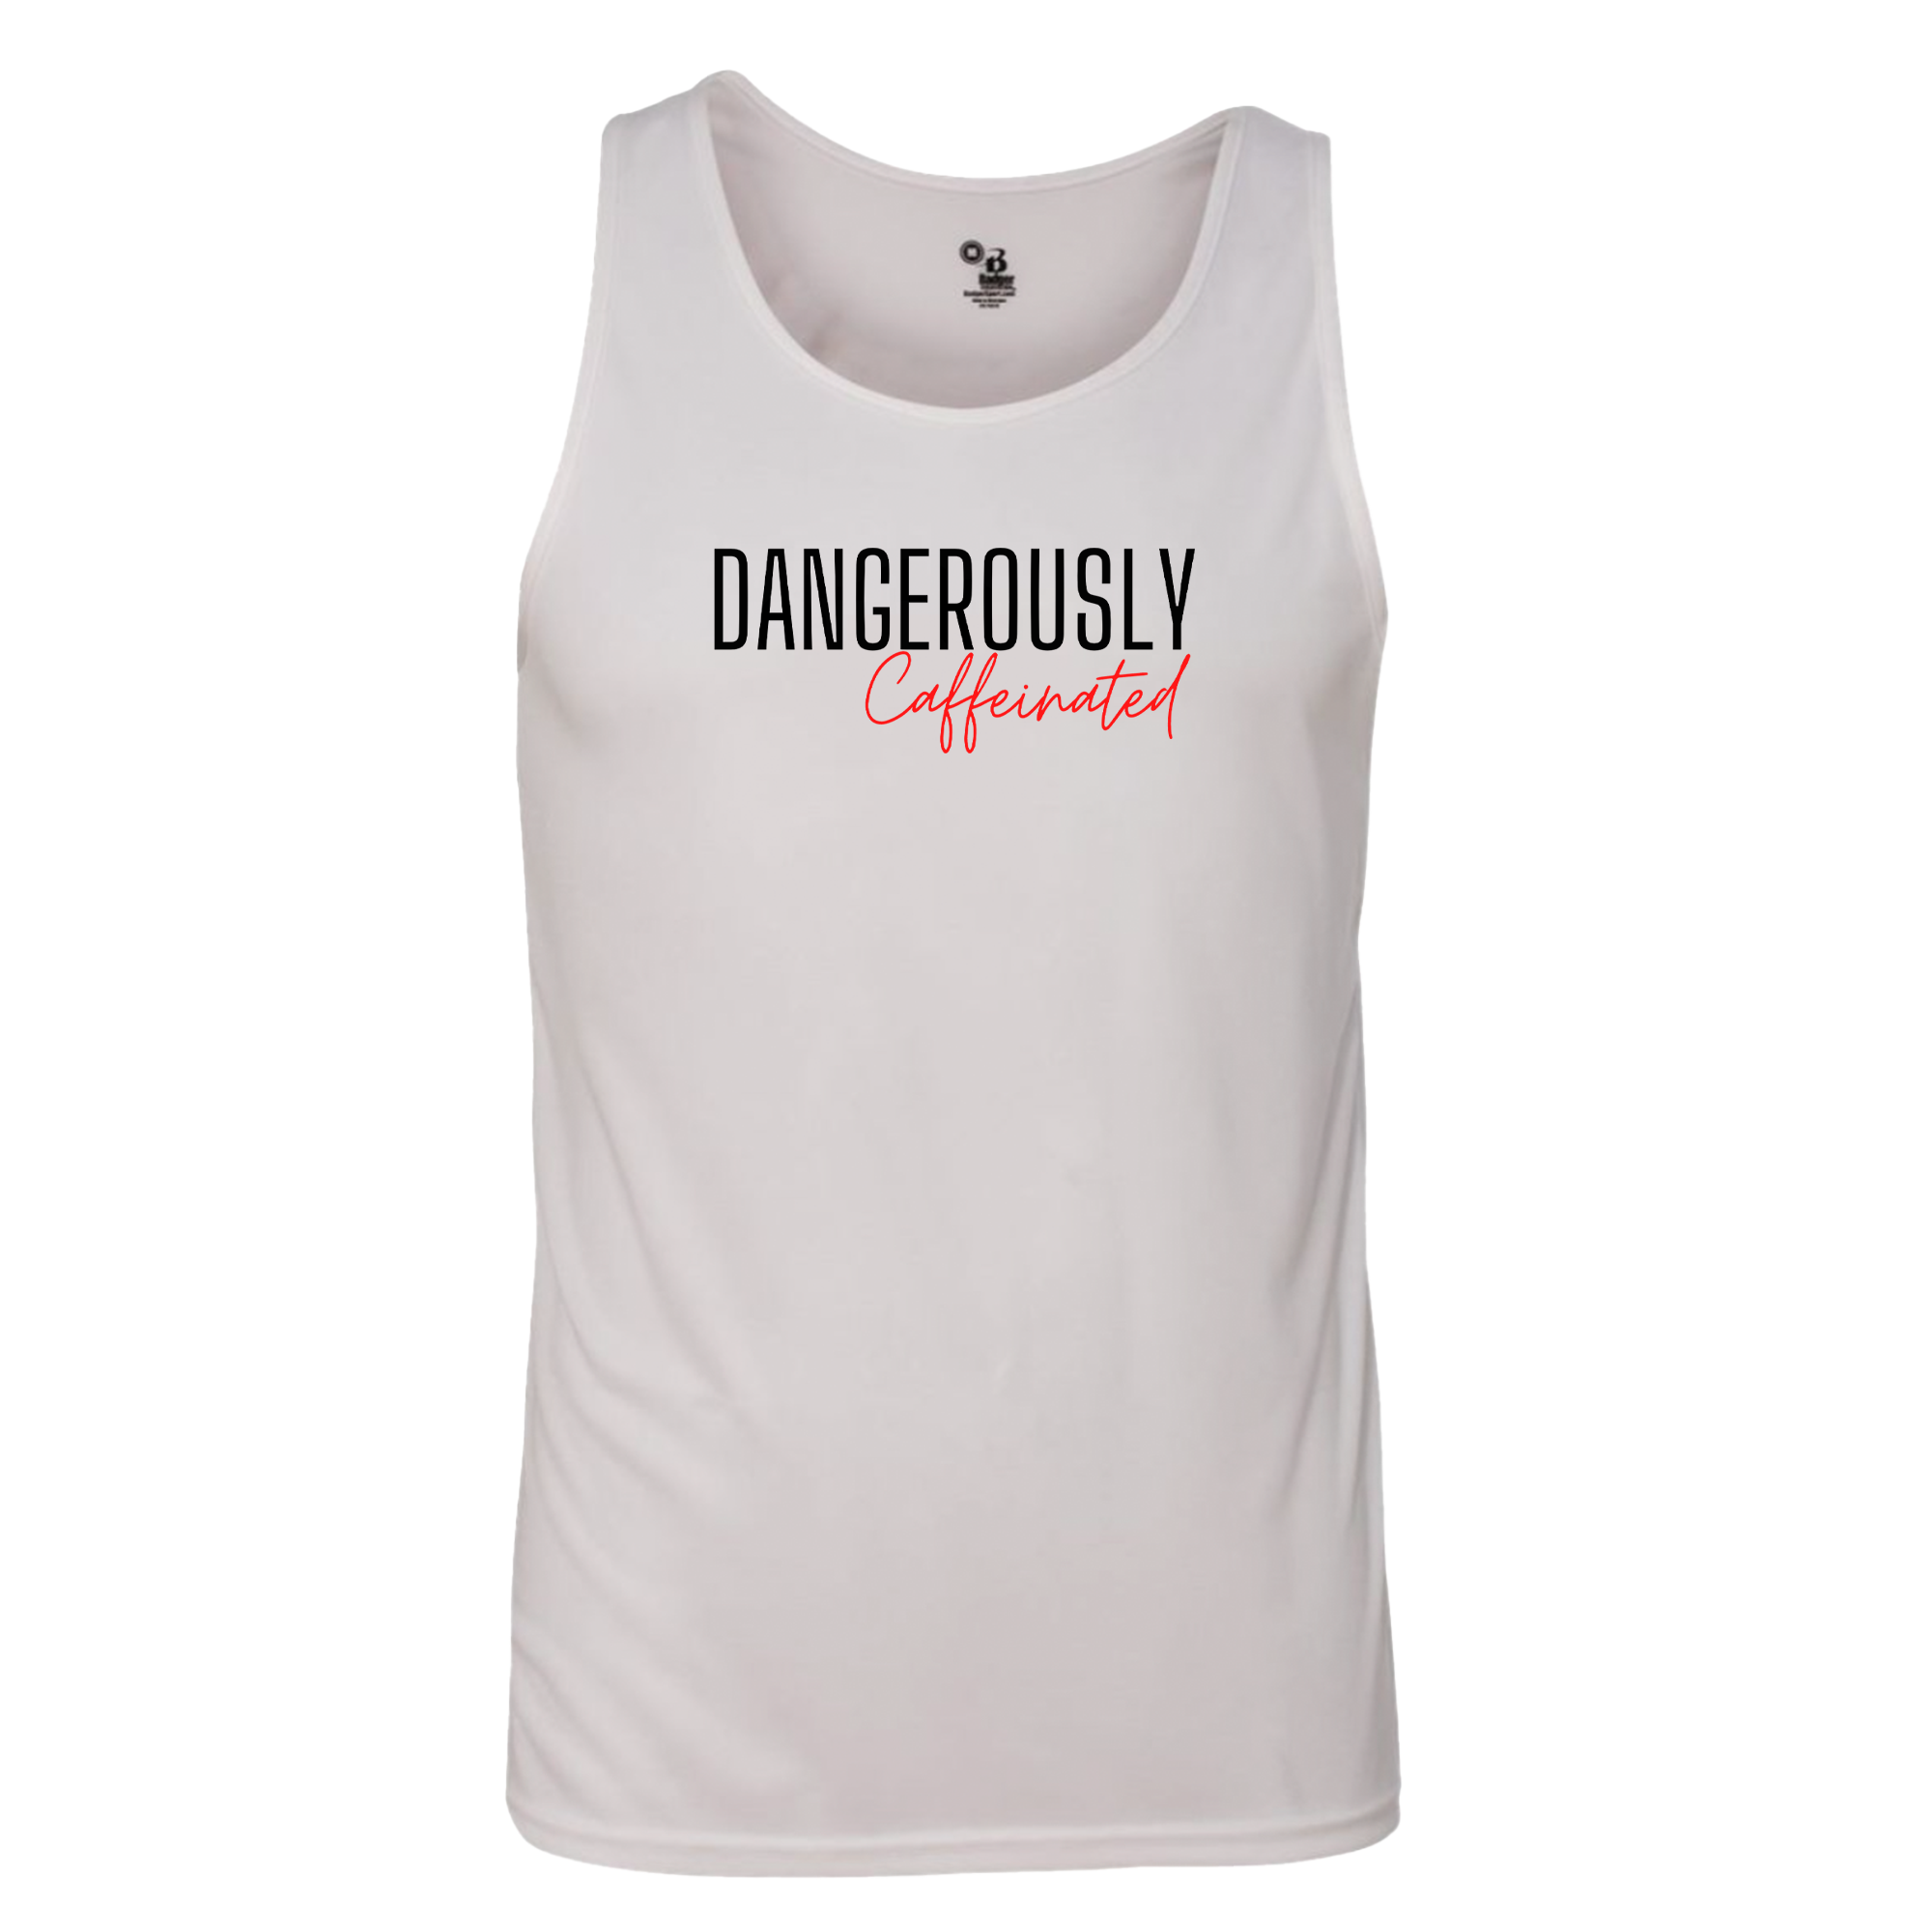 Kevin Cooney - Dangerously Caffeinated Men's Athletic Tank Top (White)